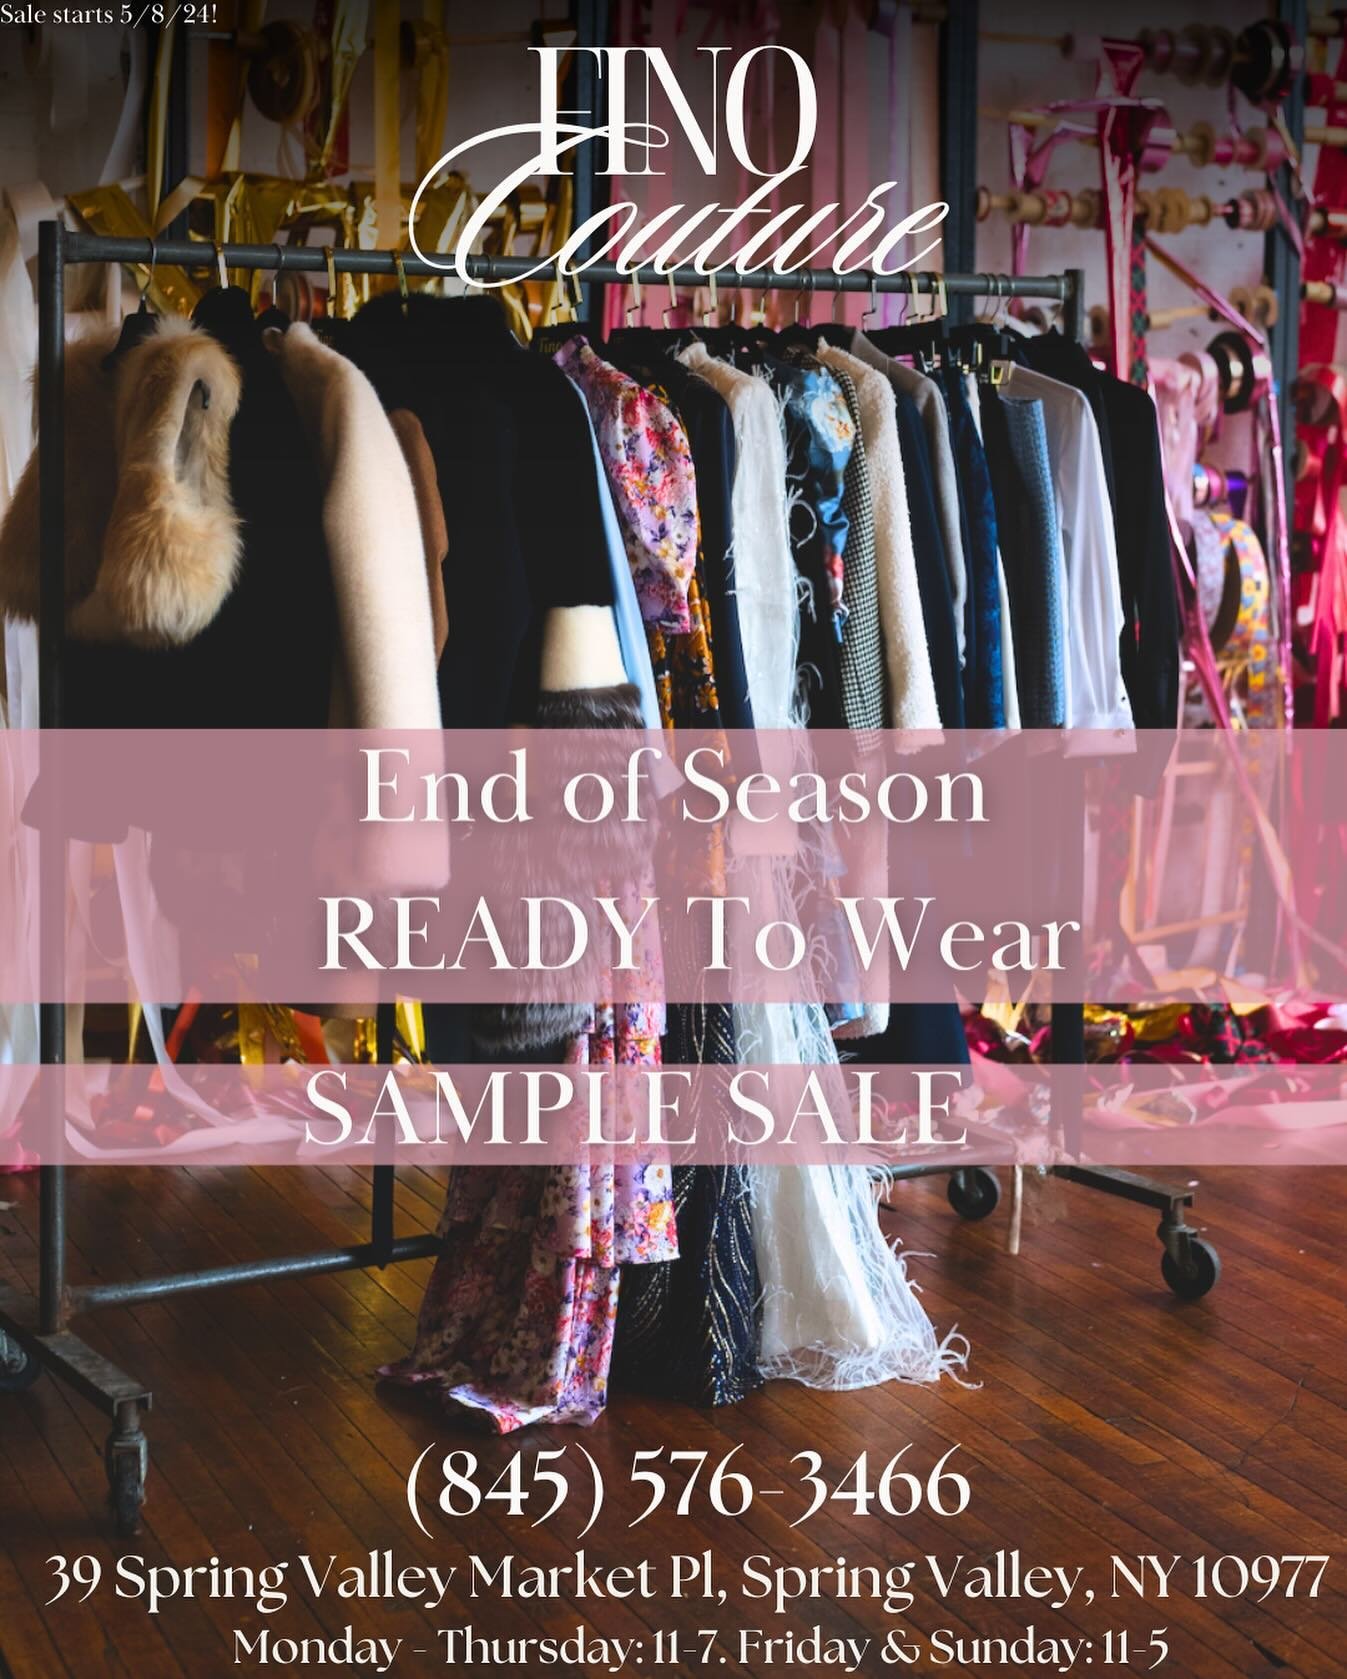 Our End of Season Sample Sale just kicked off! Massive savings on select styles in store! Be sure to come in and take advantage of these amazing deals on couture garments! #finocouture #dresses #dress